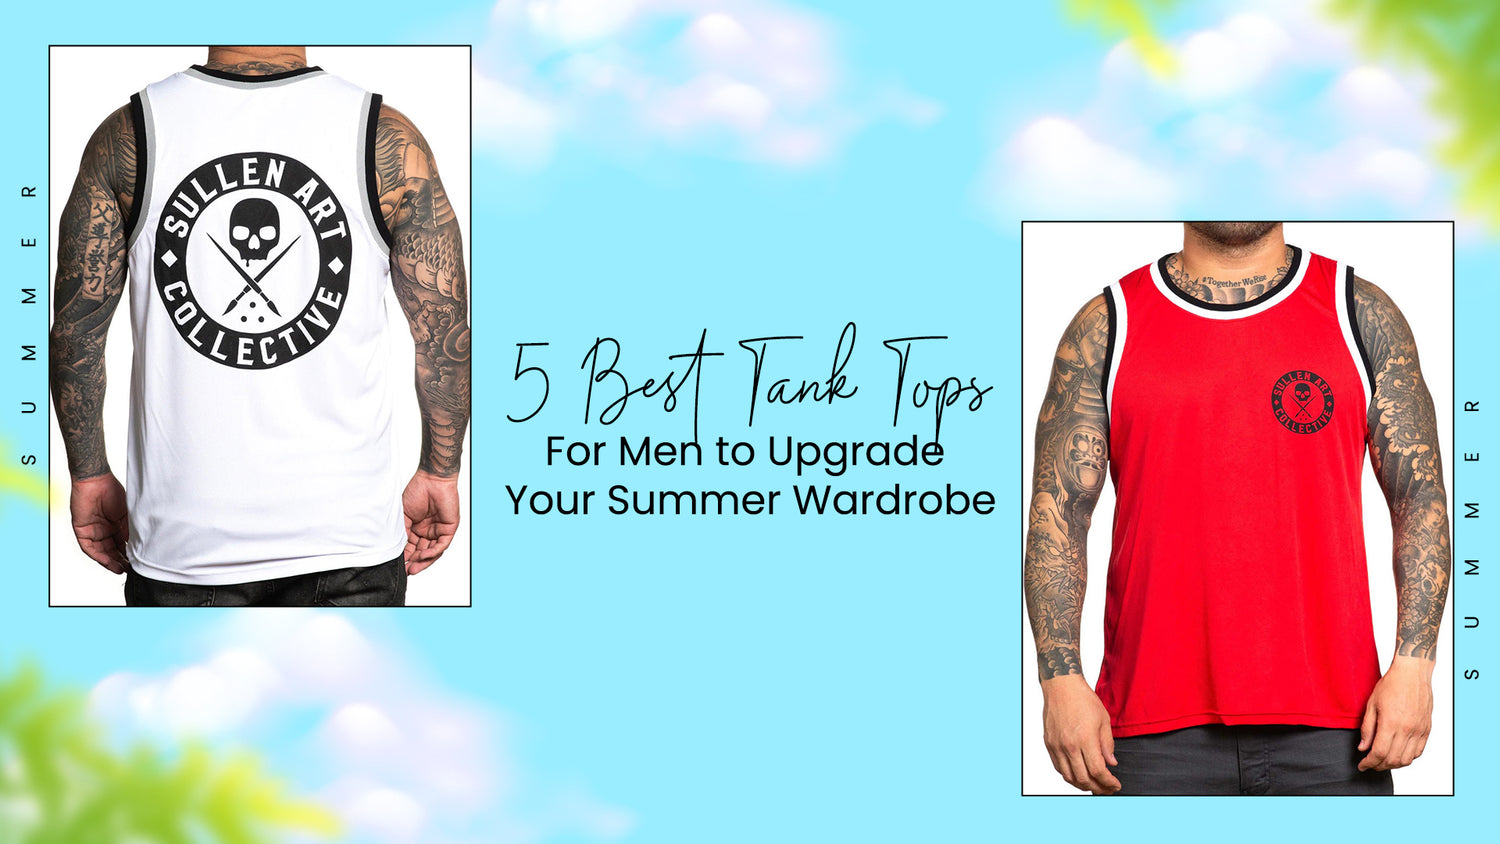 4 Best Tank Tops for Men to Upgrade Your Summer Wardrobe